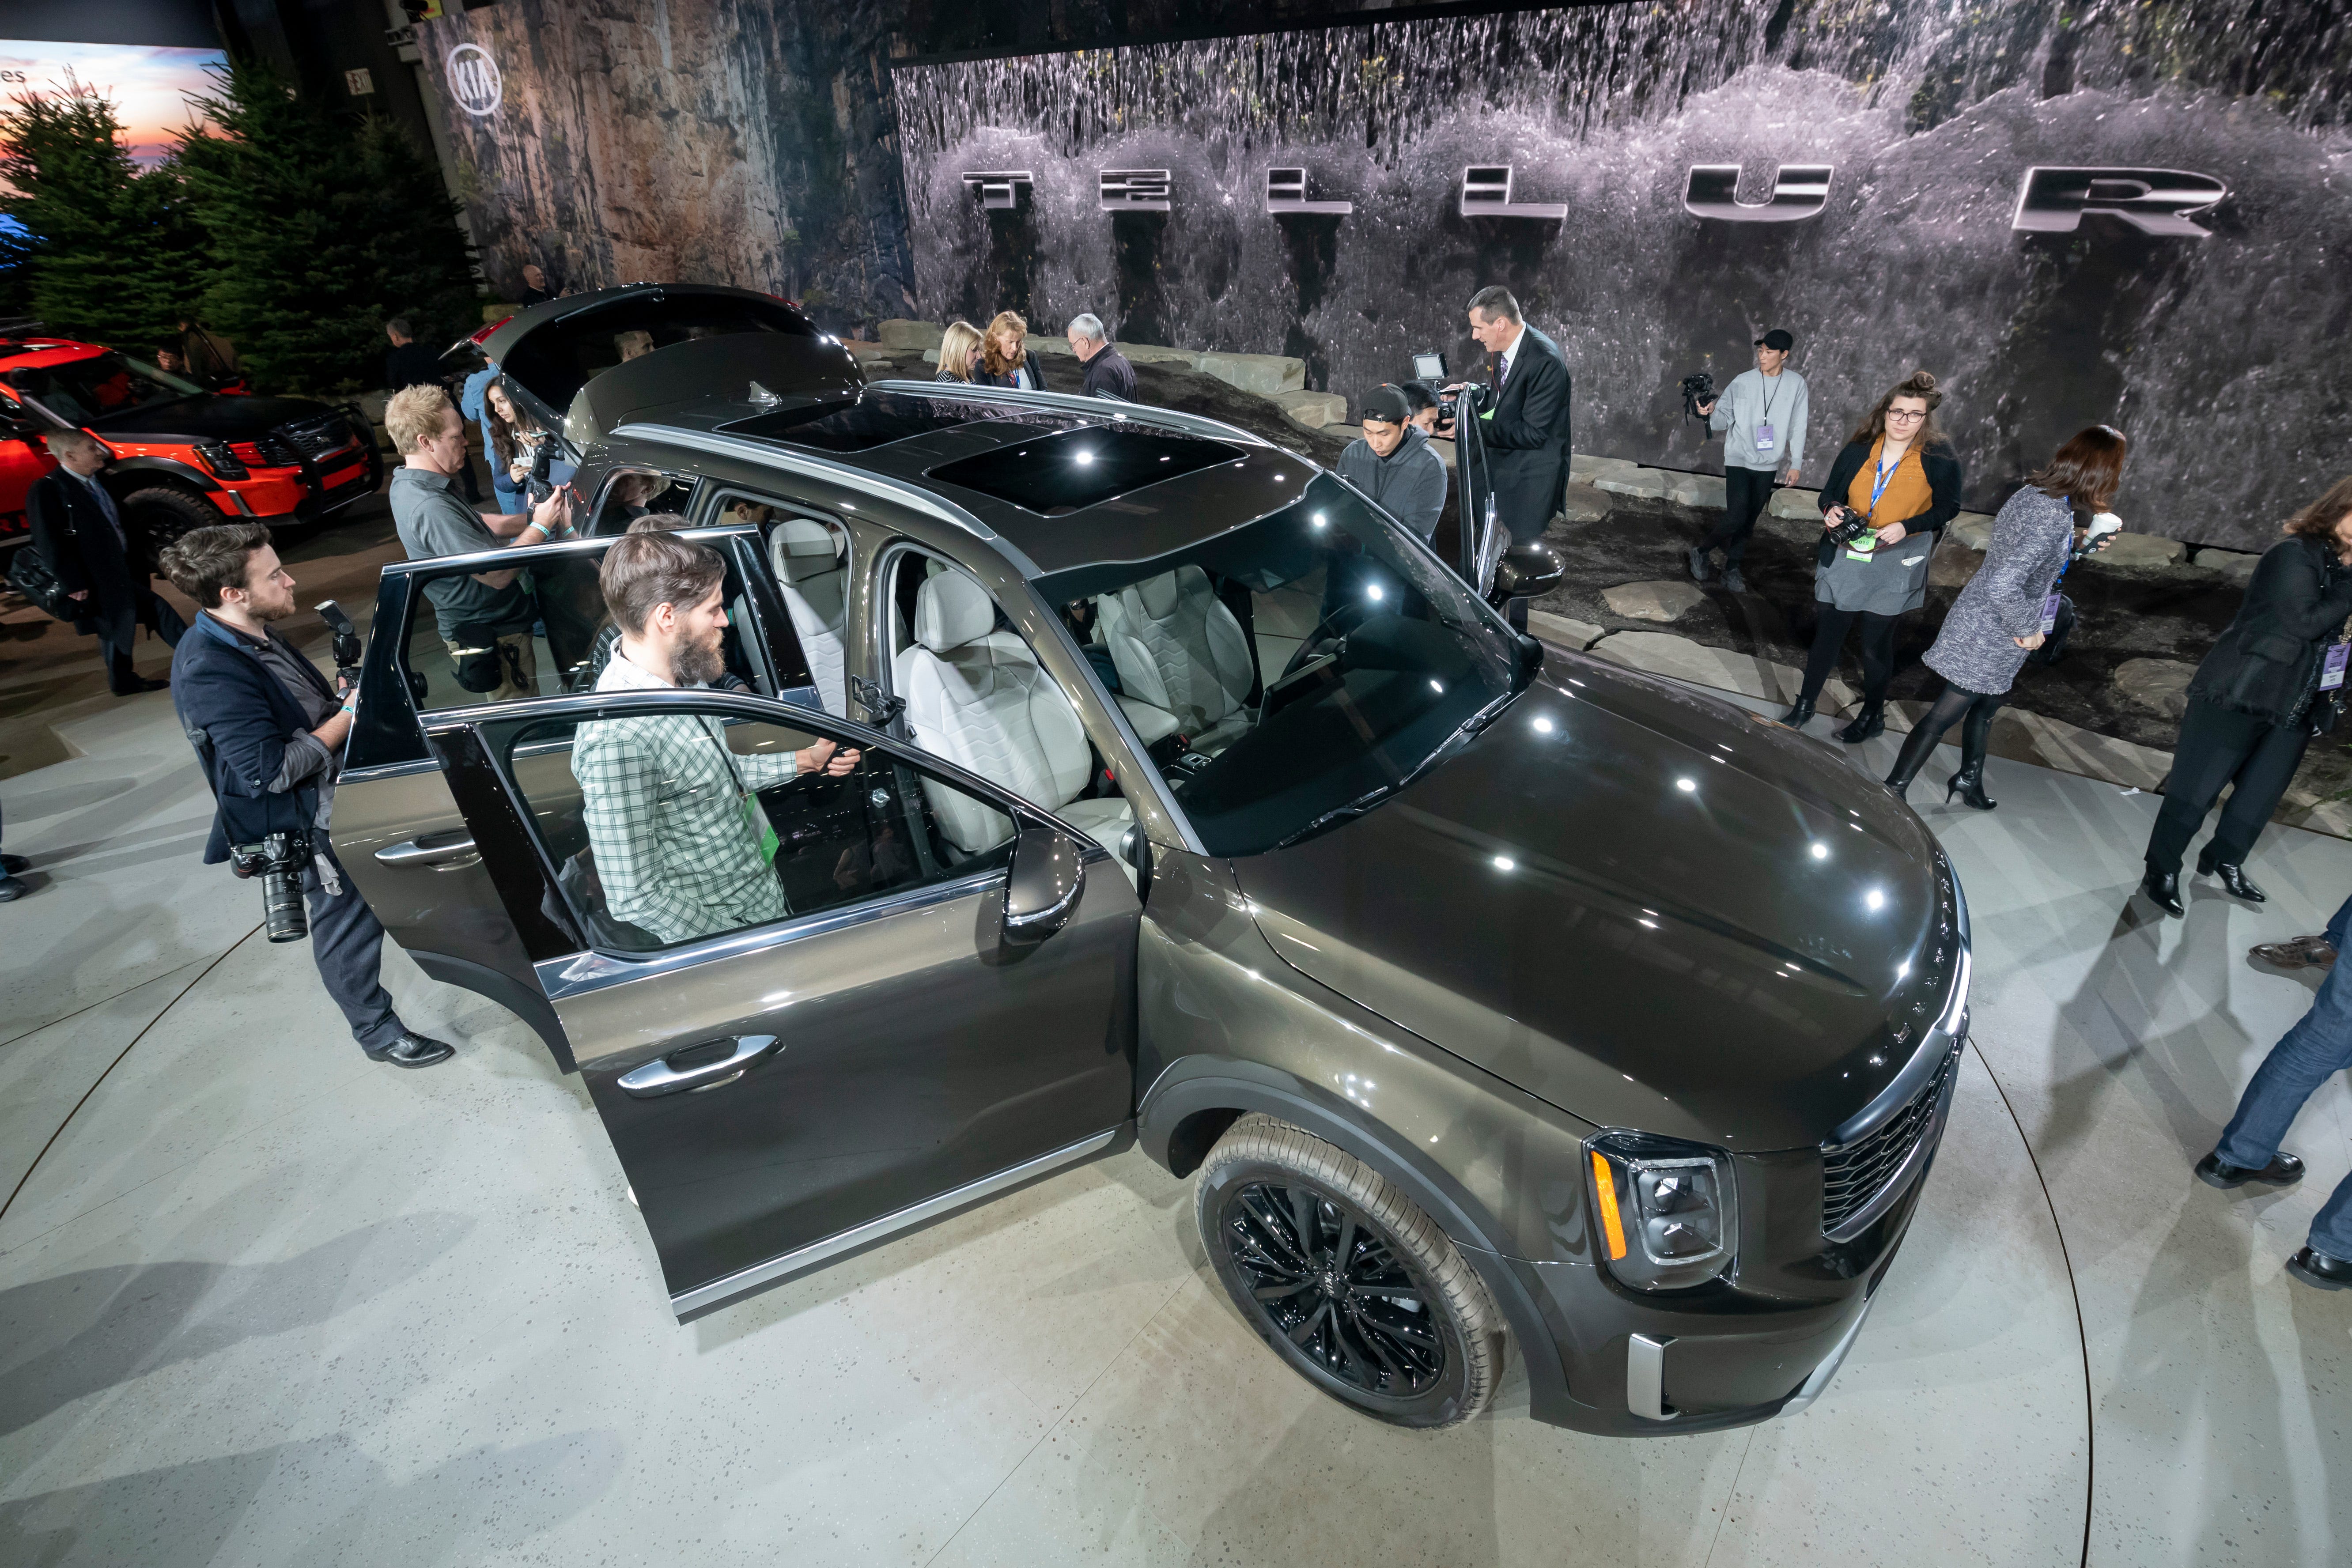 Journalists examine the 2020 Kia Telluride after its introduction.